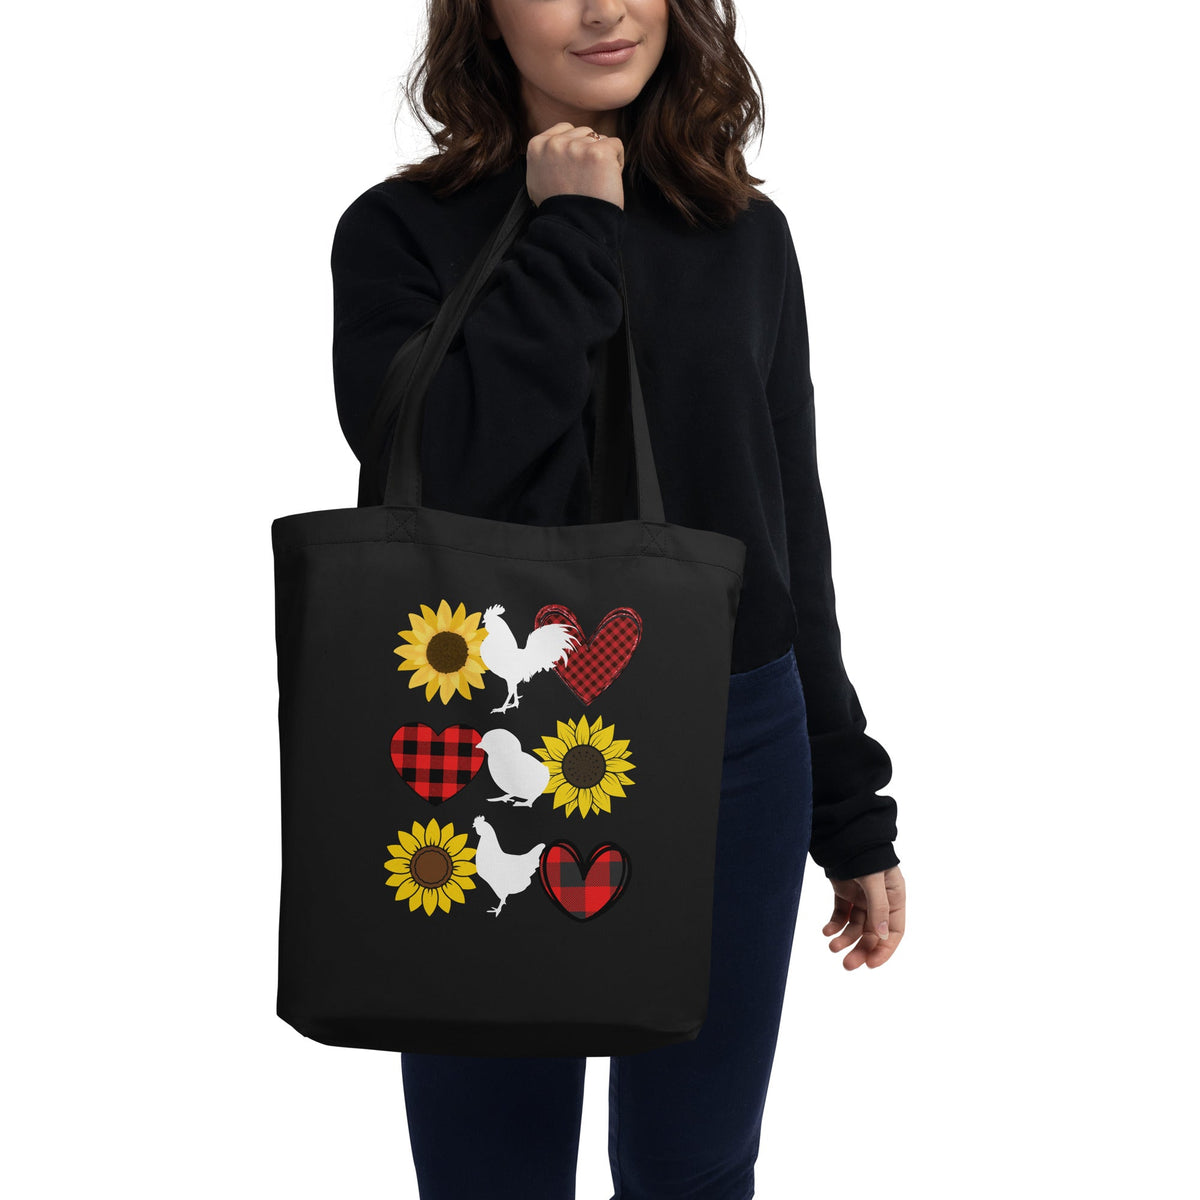 Fall Sunflower Chicken Eco Tote Bag - Cluck It All Farms